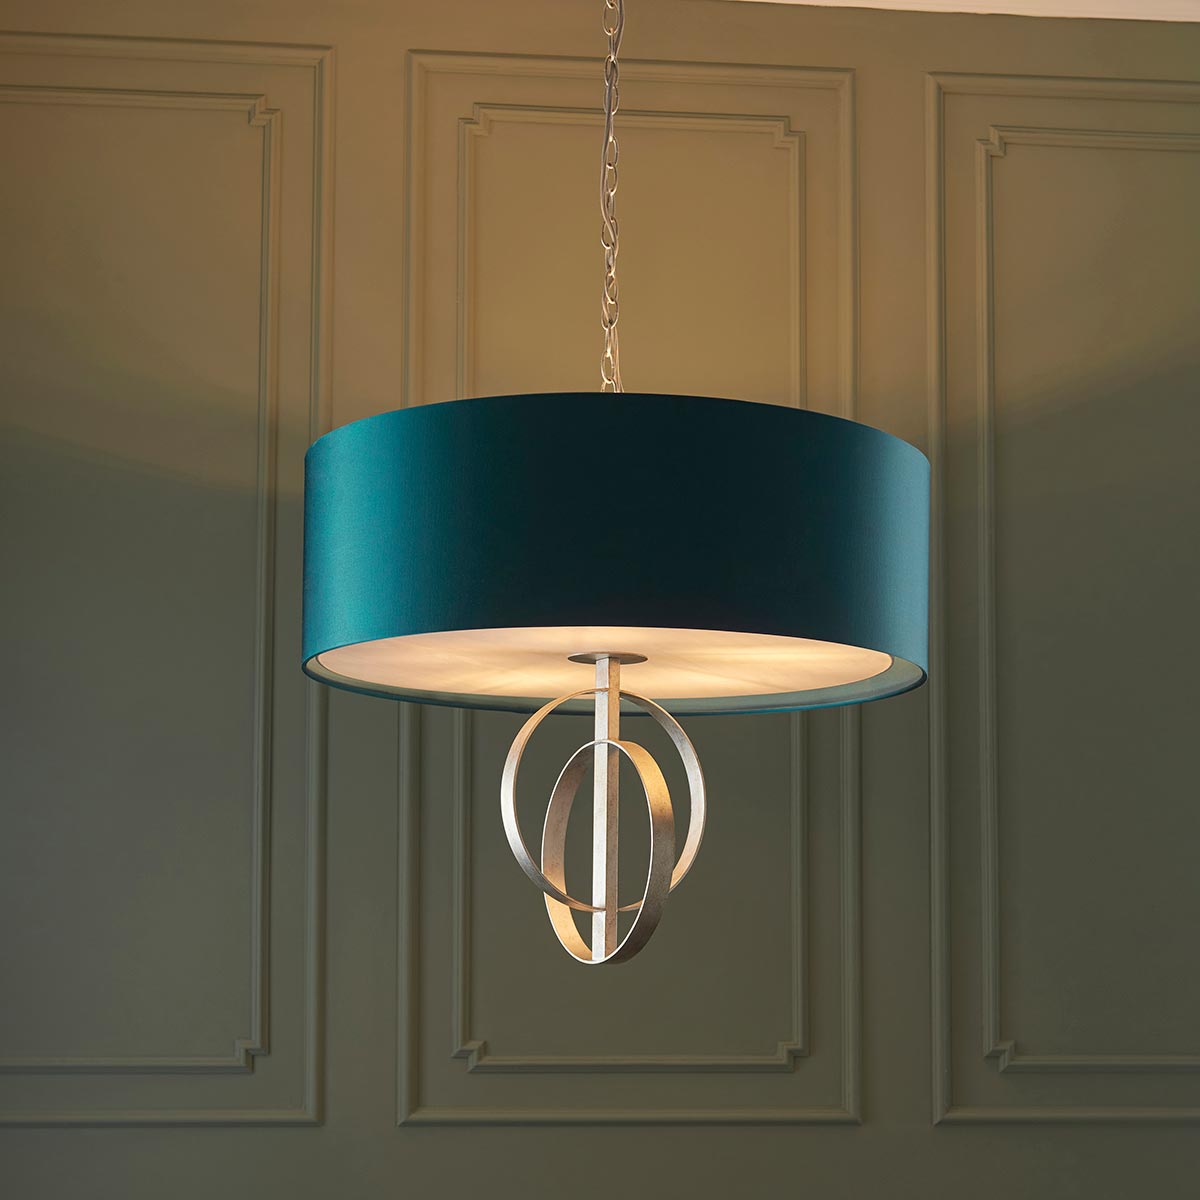 Stylish Double Hoop 5 Light Ceiling Pendant Silver Leaf 70cm Teal Shade